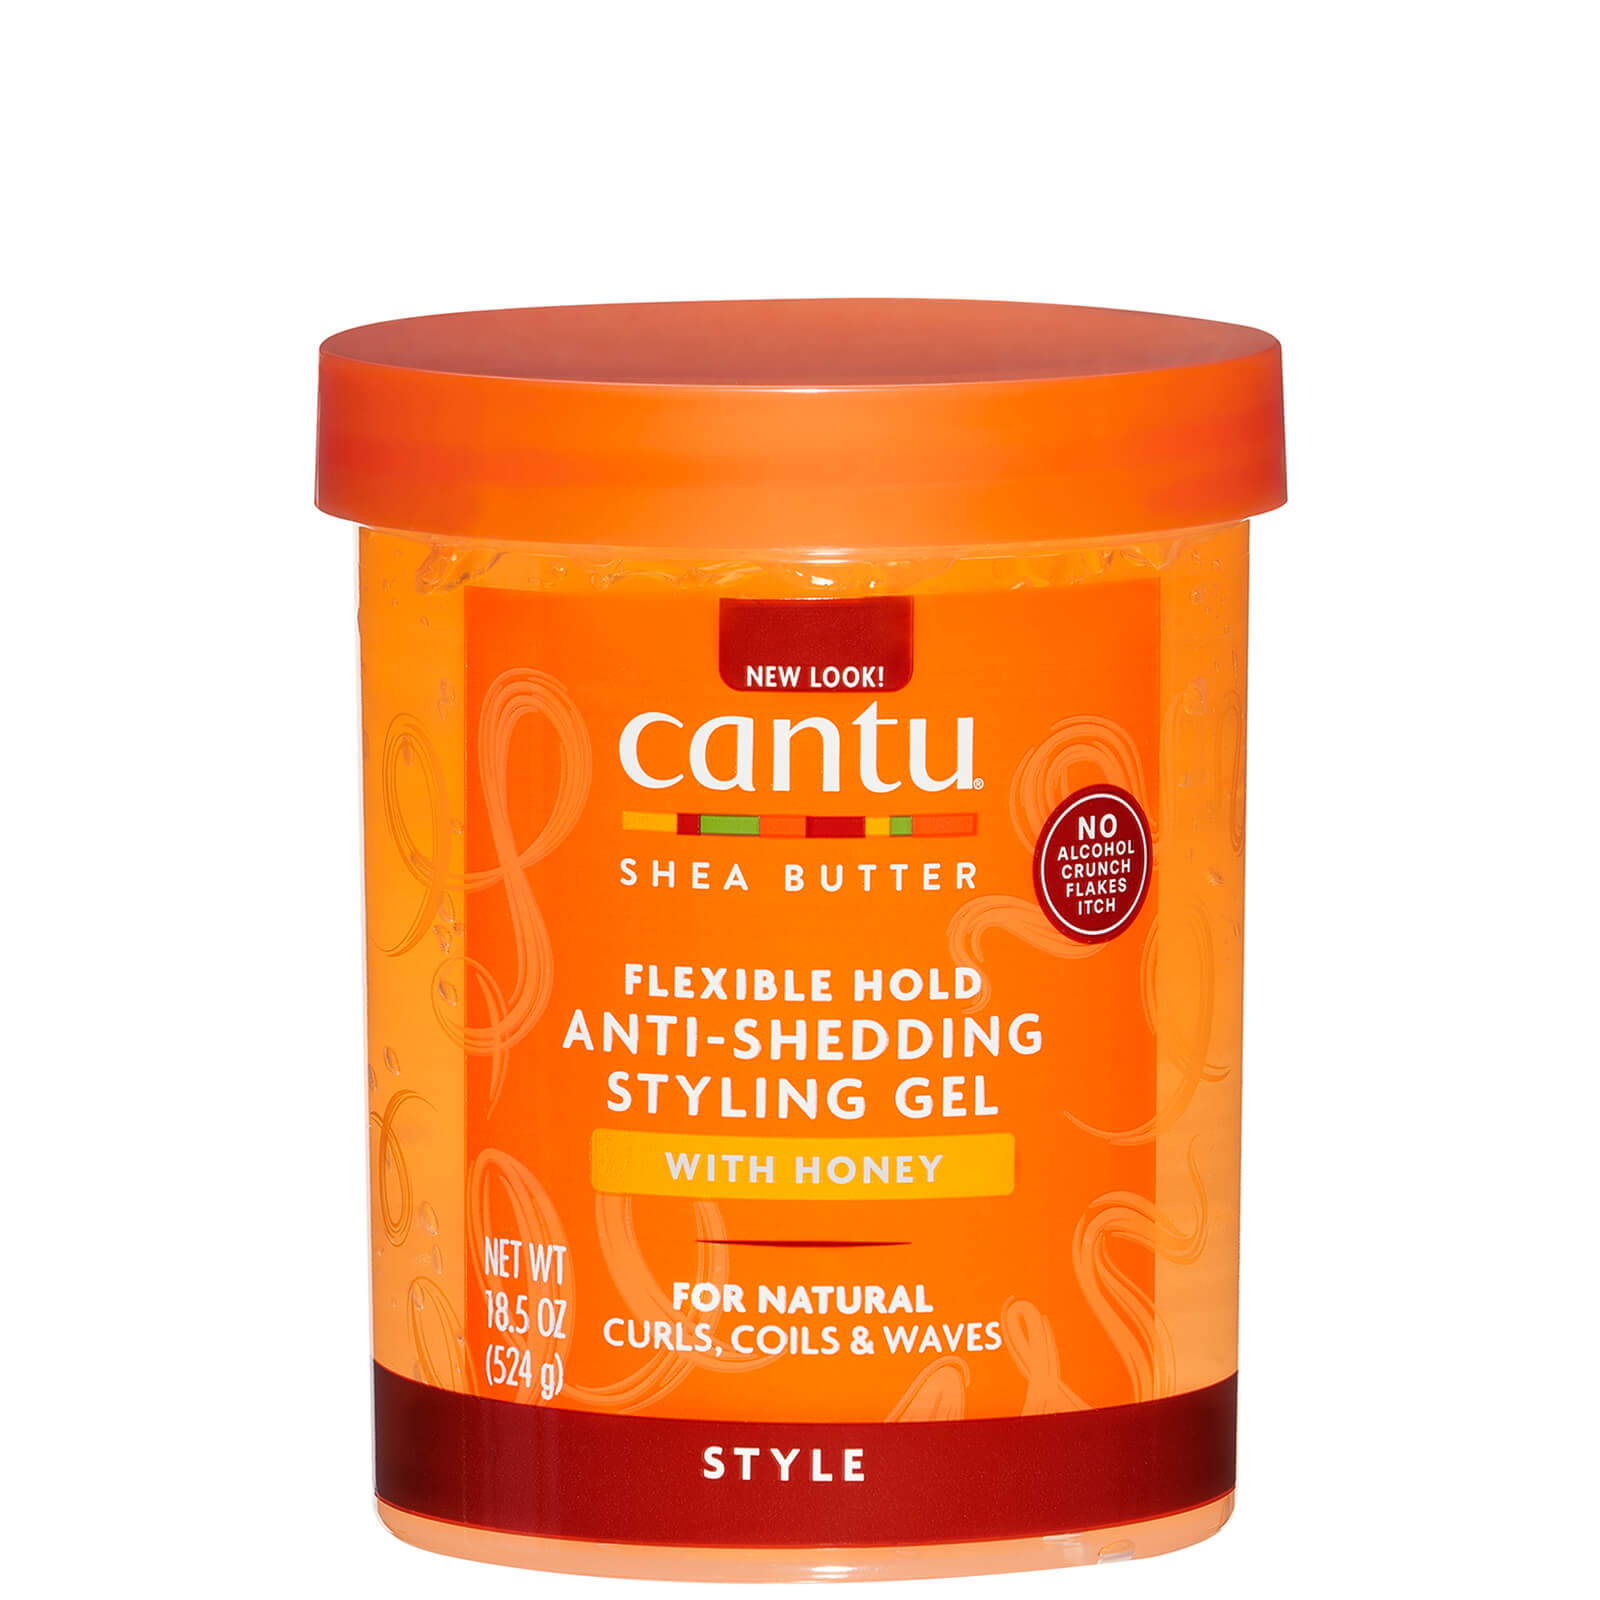 Photos - Hair Styling Product Cantu Shea Butter Maximum Hold Anti-Shedding Styling Gel with Honey 18.5 o 